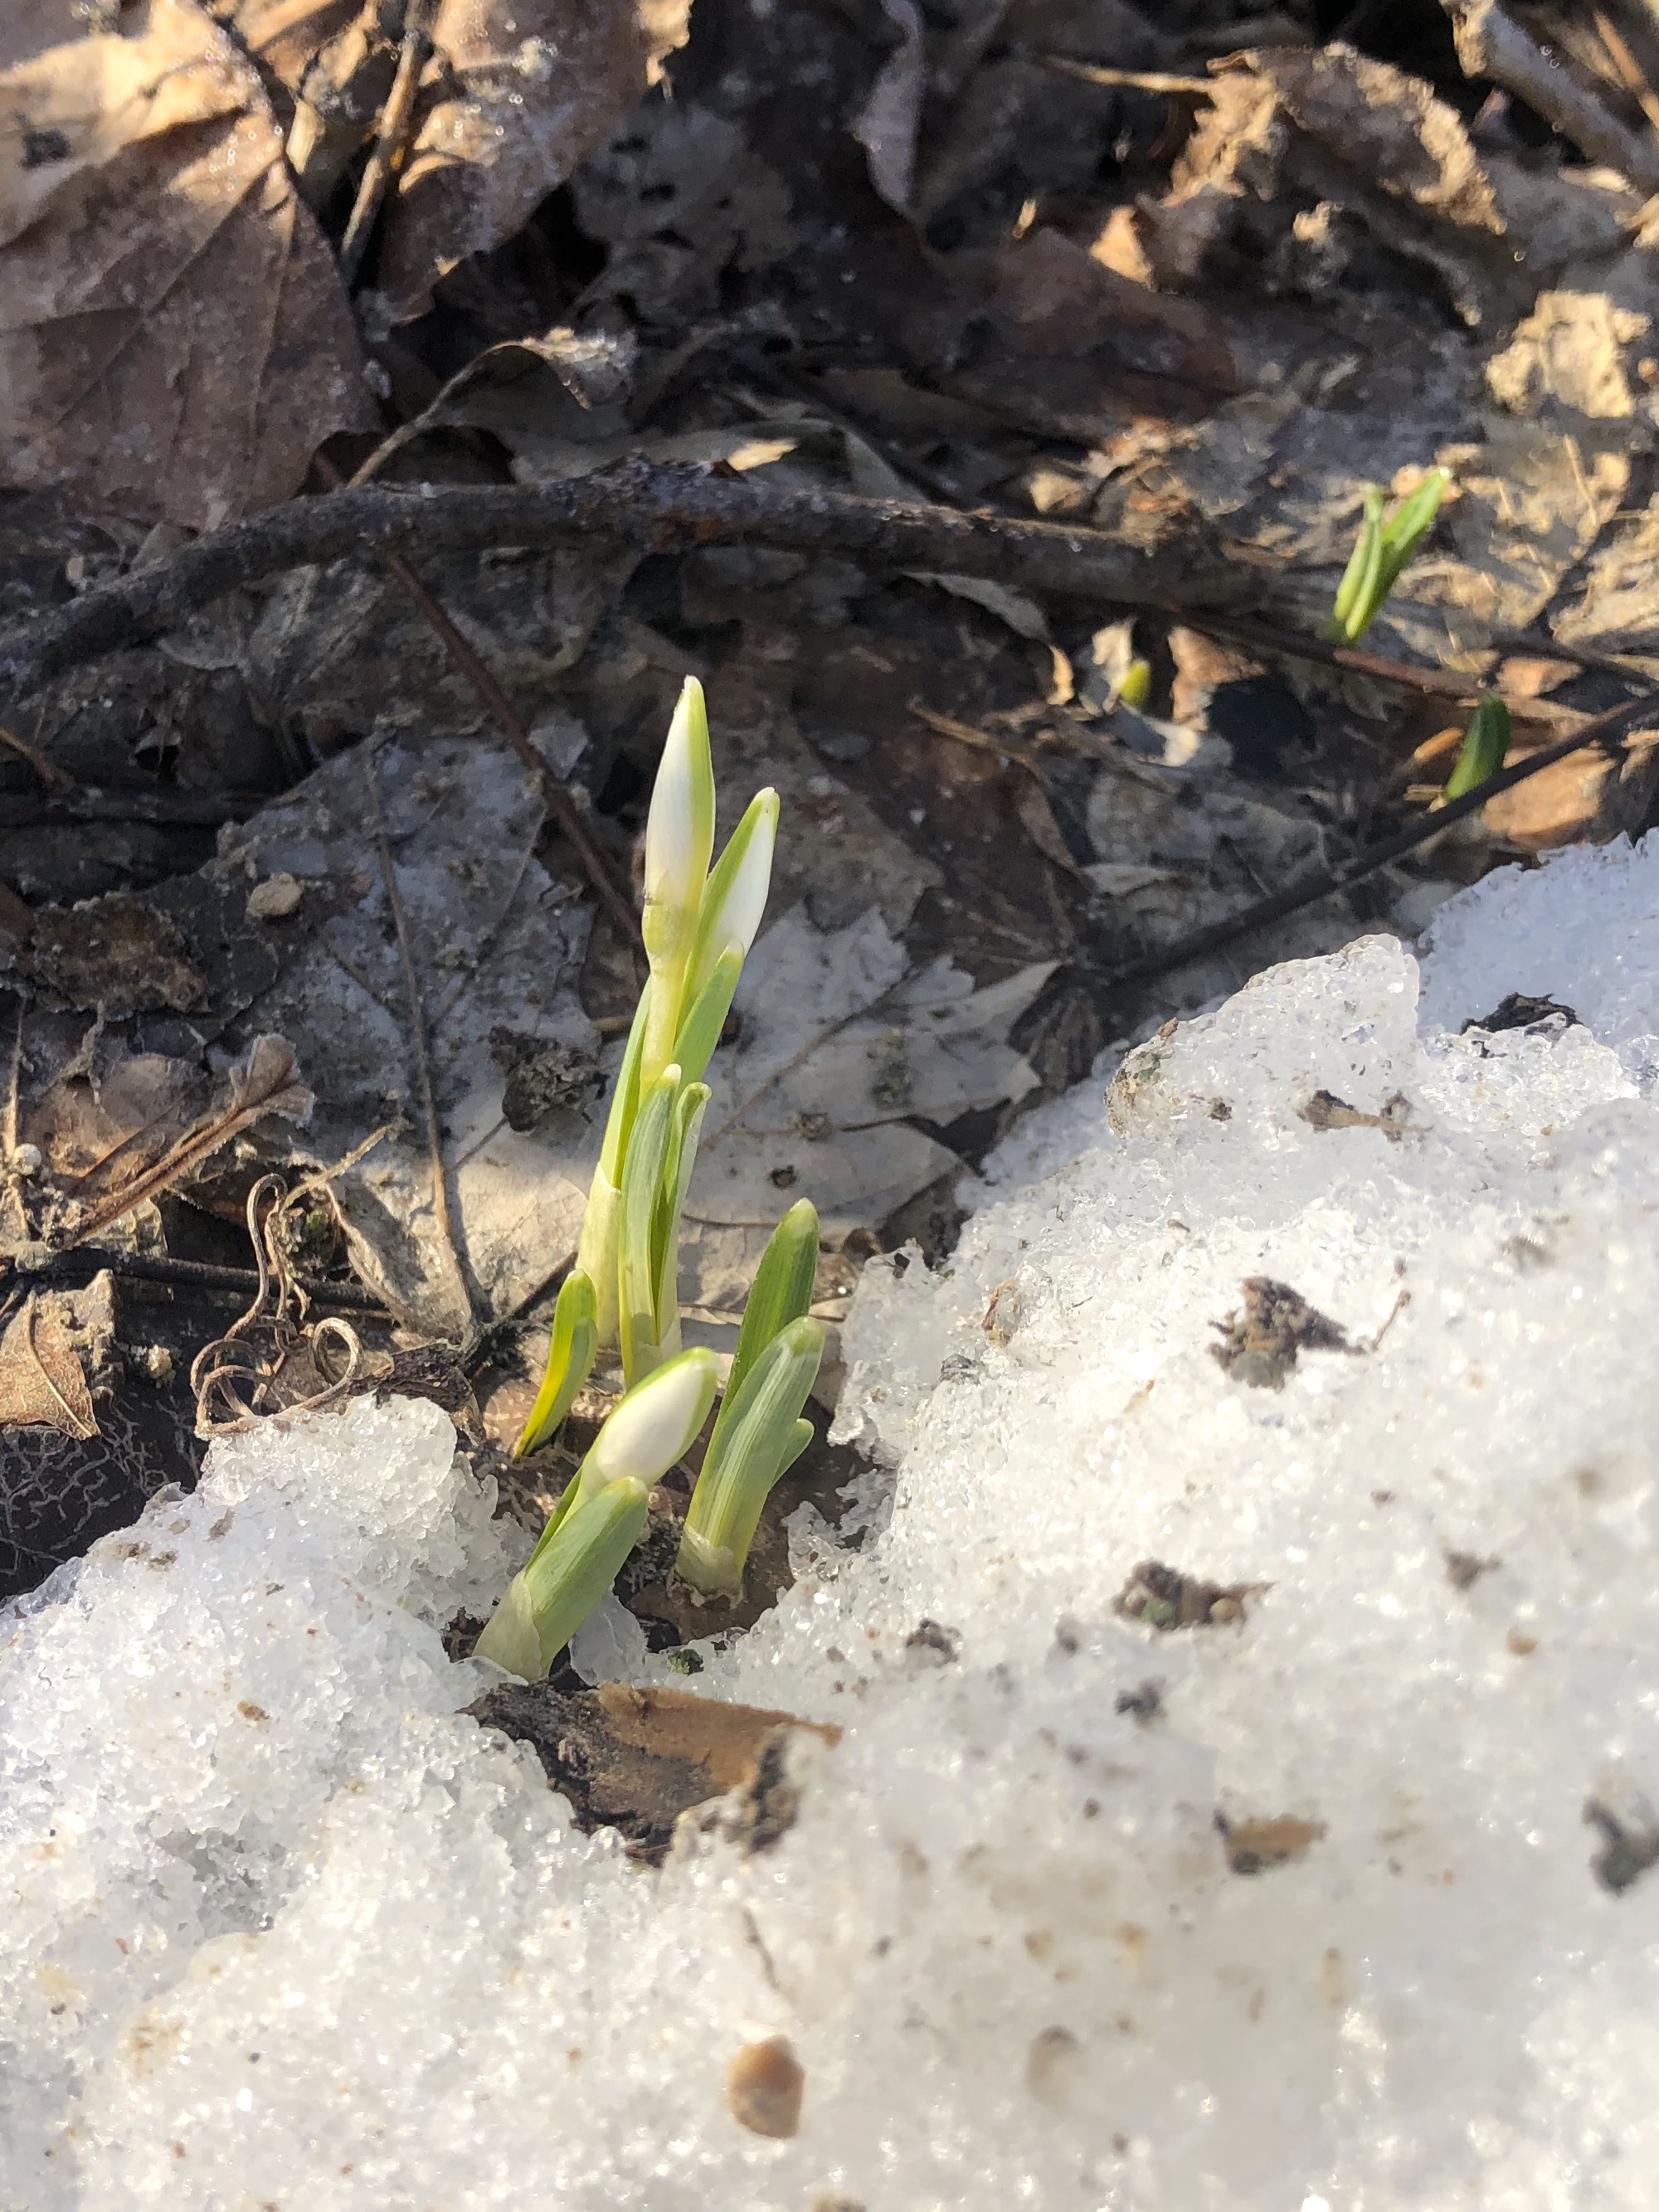 Snowdrops emerging in Madison Wisconsin along Arbor Drive on March 7, 2021.